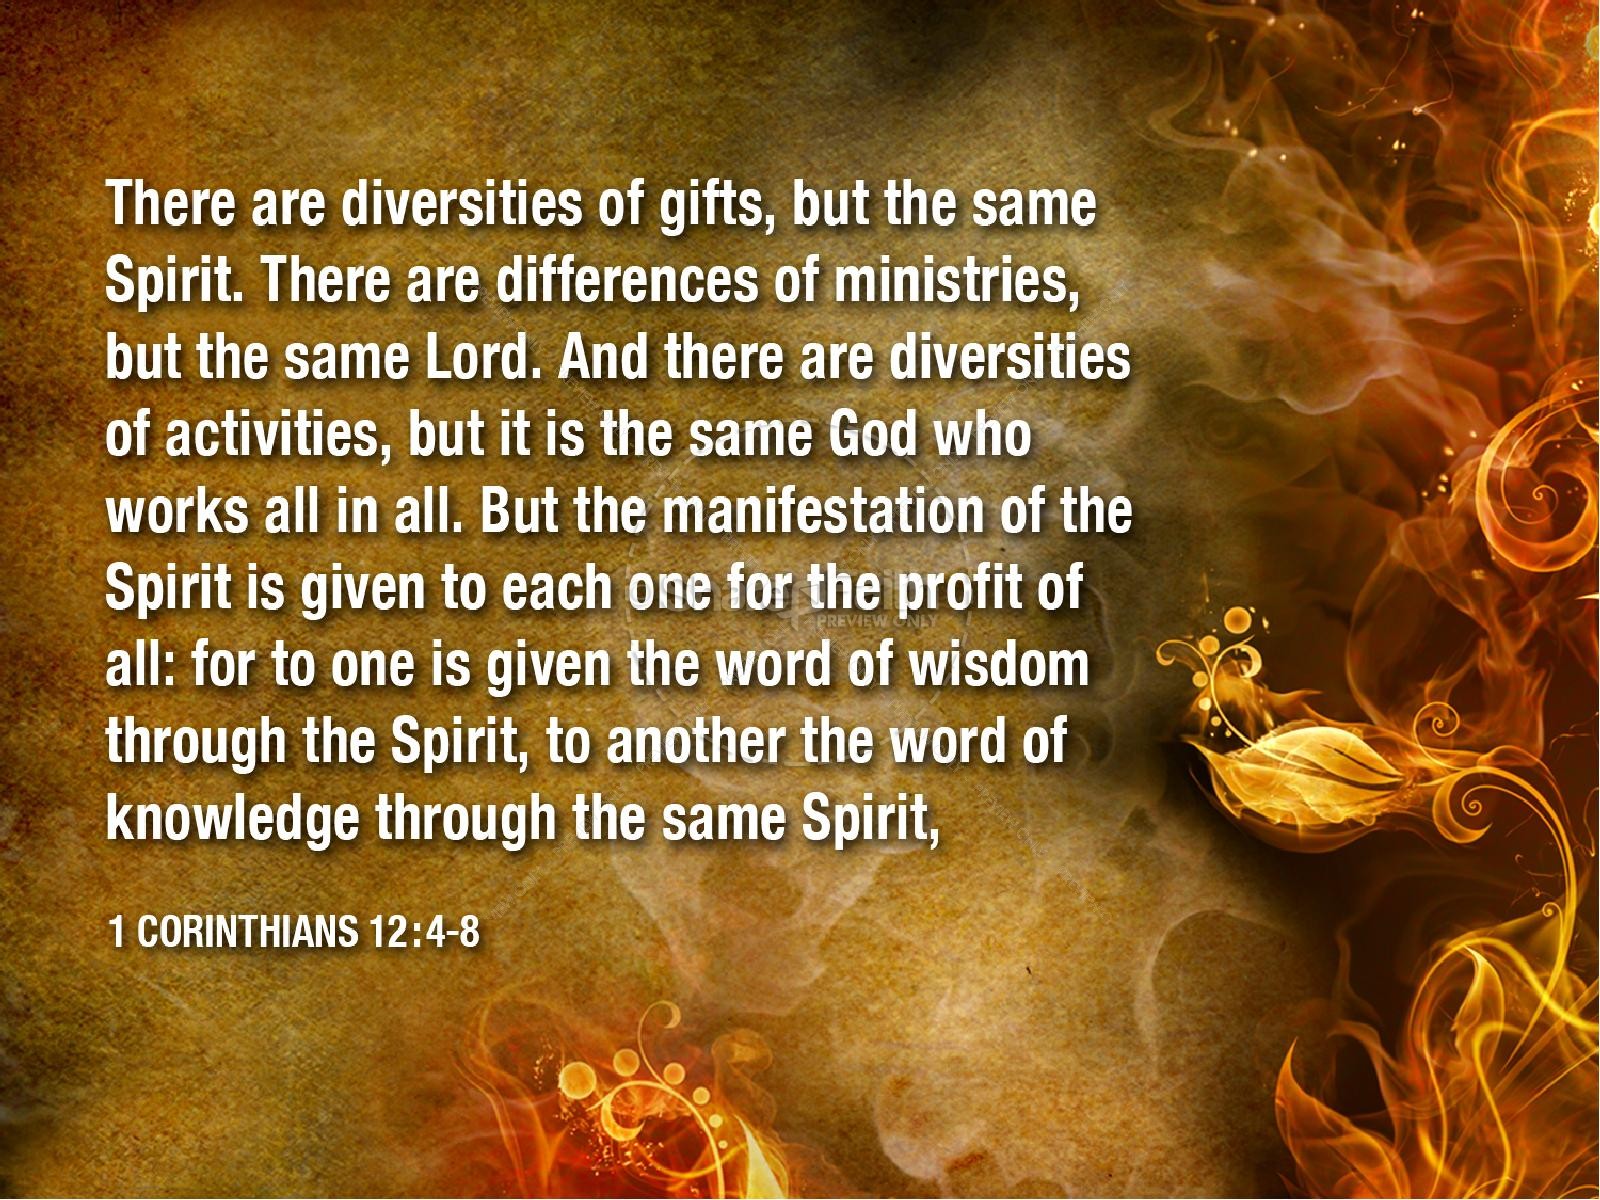 Holy Spirit Gifts PowerPoint Thumbnail 5